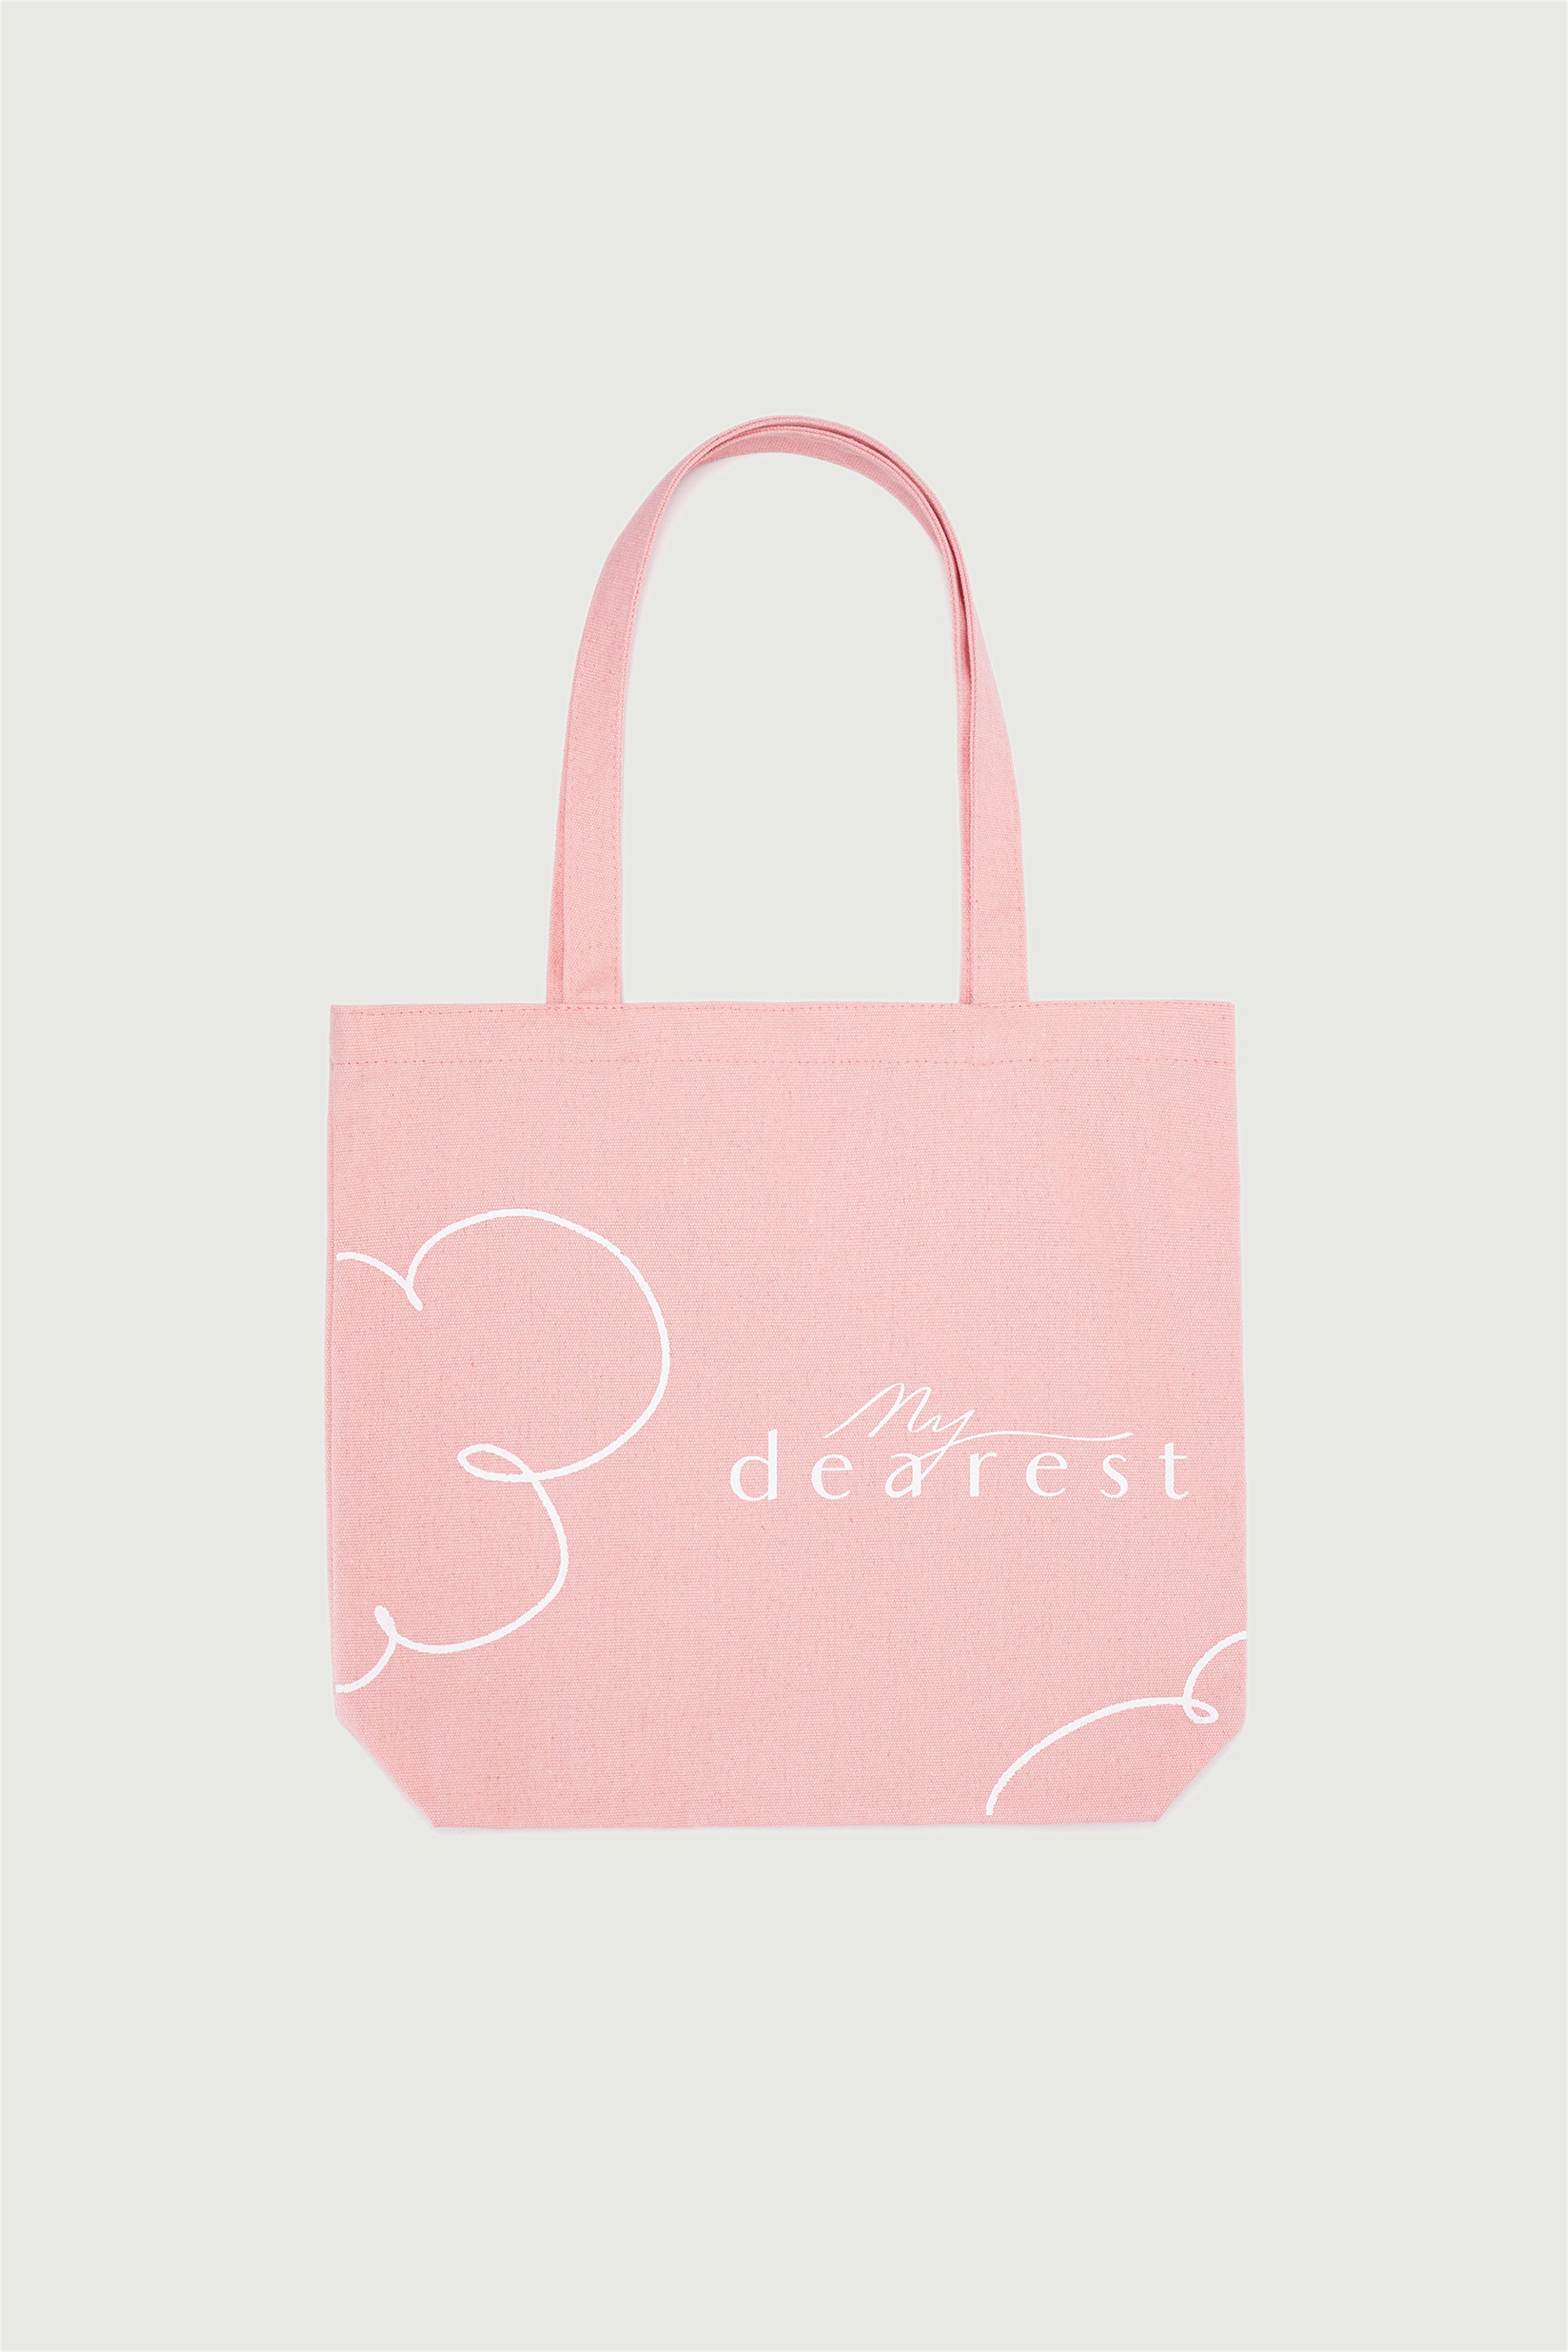 My Dearest Canvas Tote